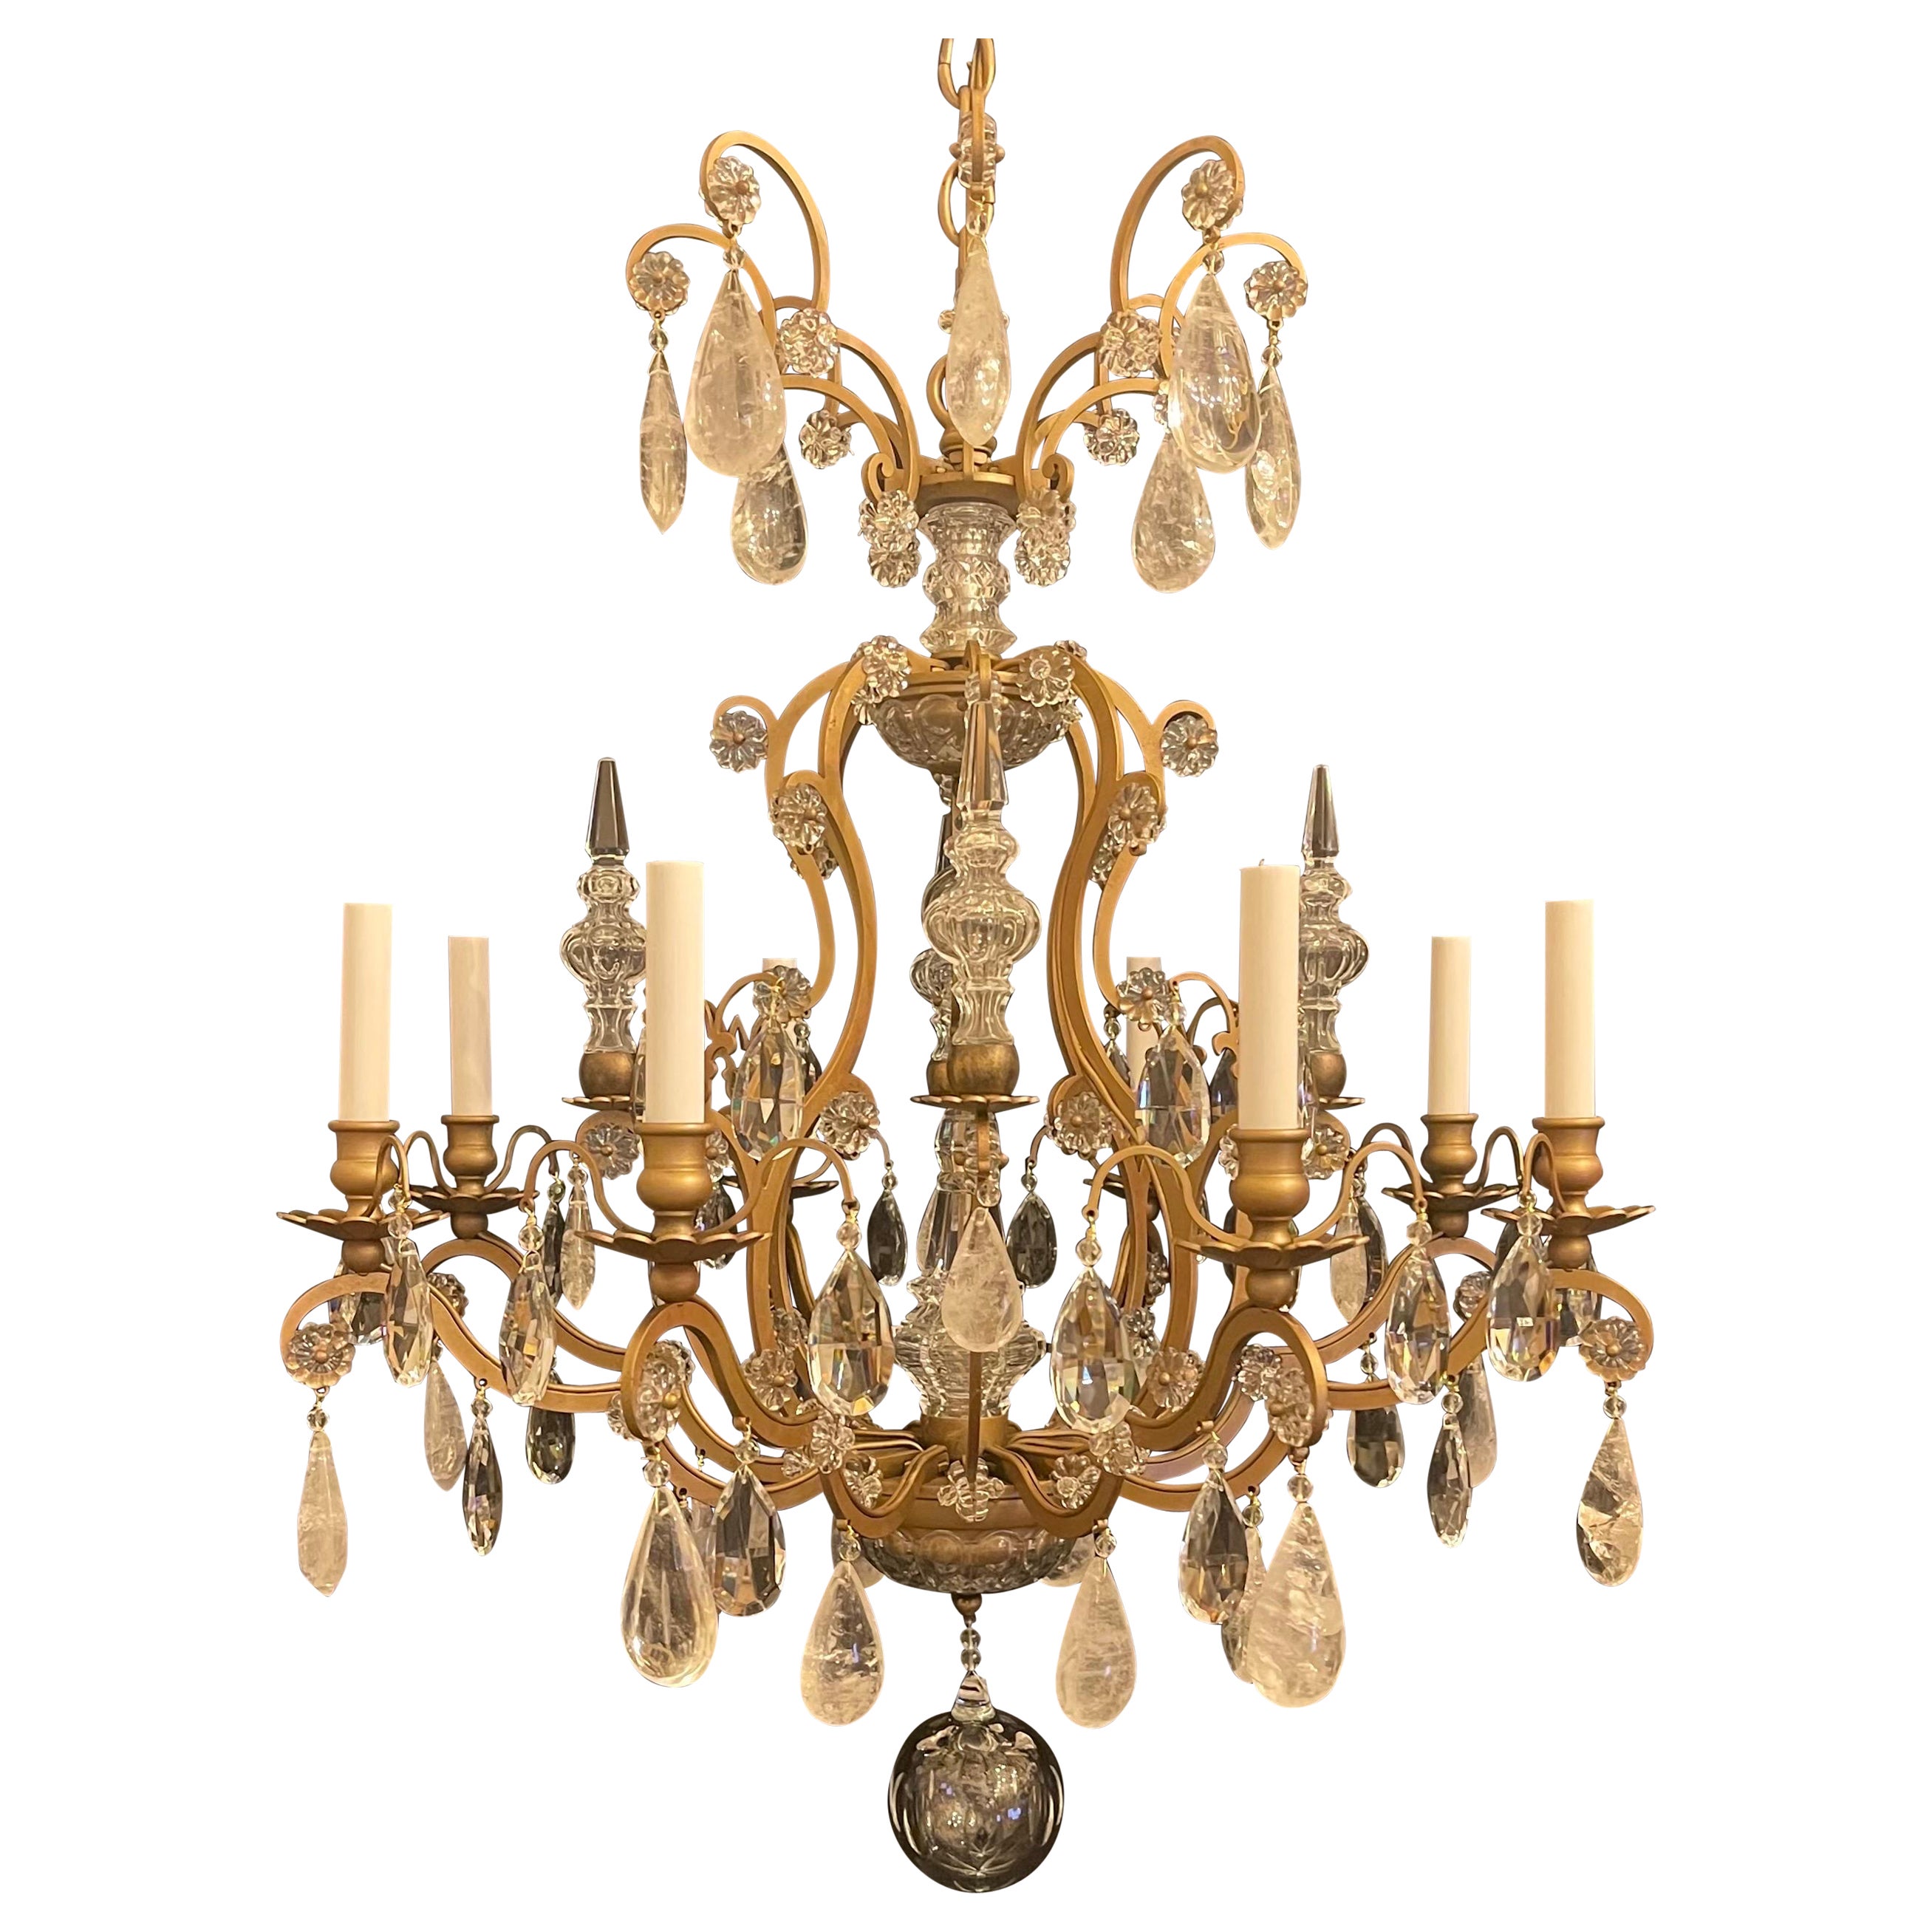 Magnificent Large French Gold Gilt Rock Crystal Louis XVI 8 Light Chandelier